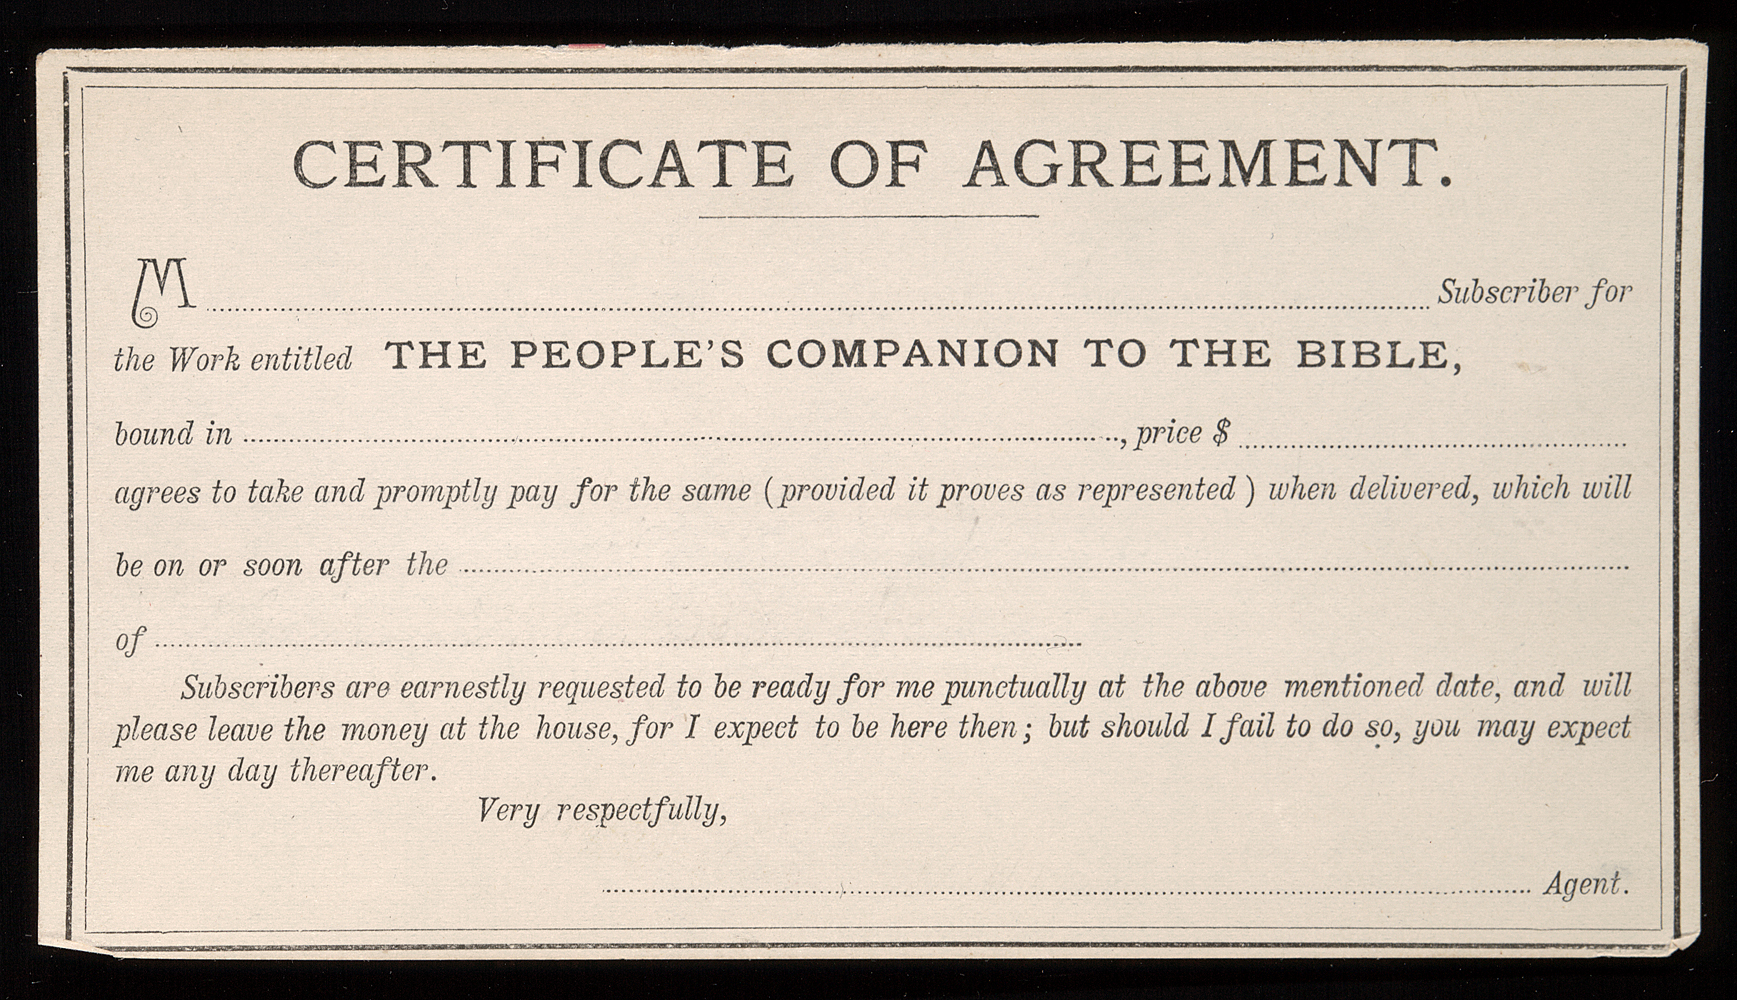 purchaser certificate of agreement form to remind them of obligation